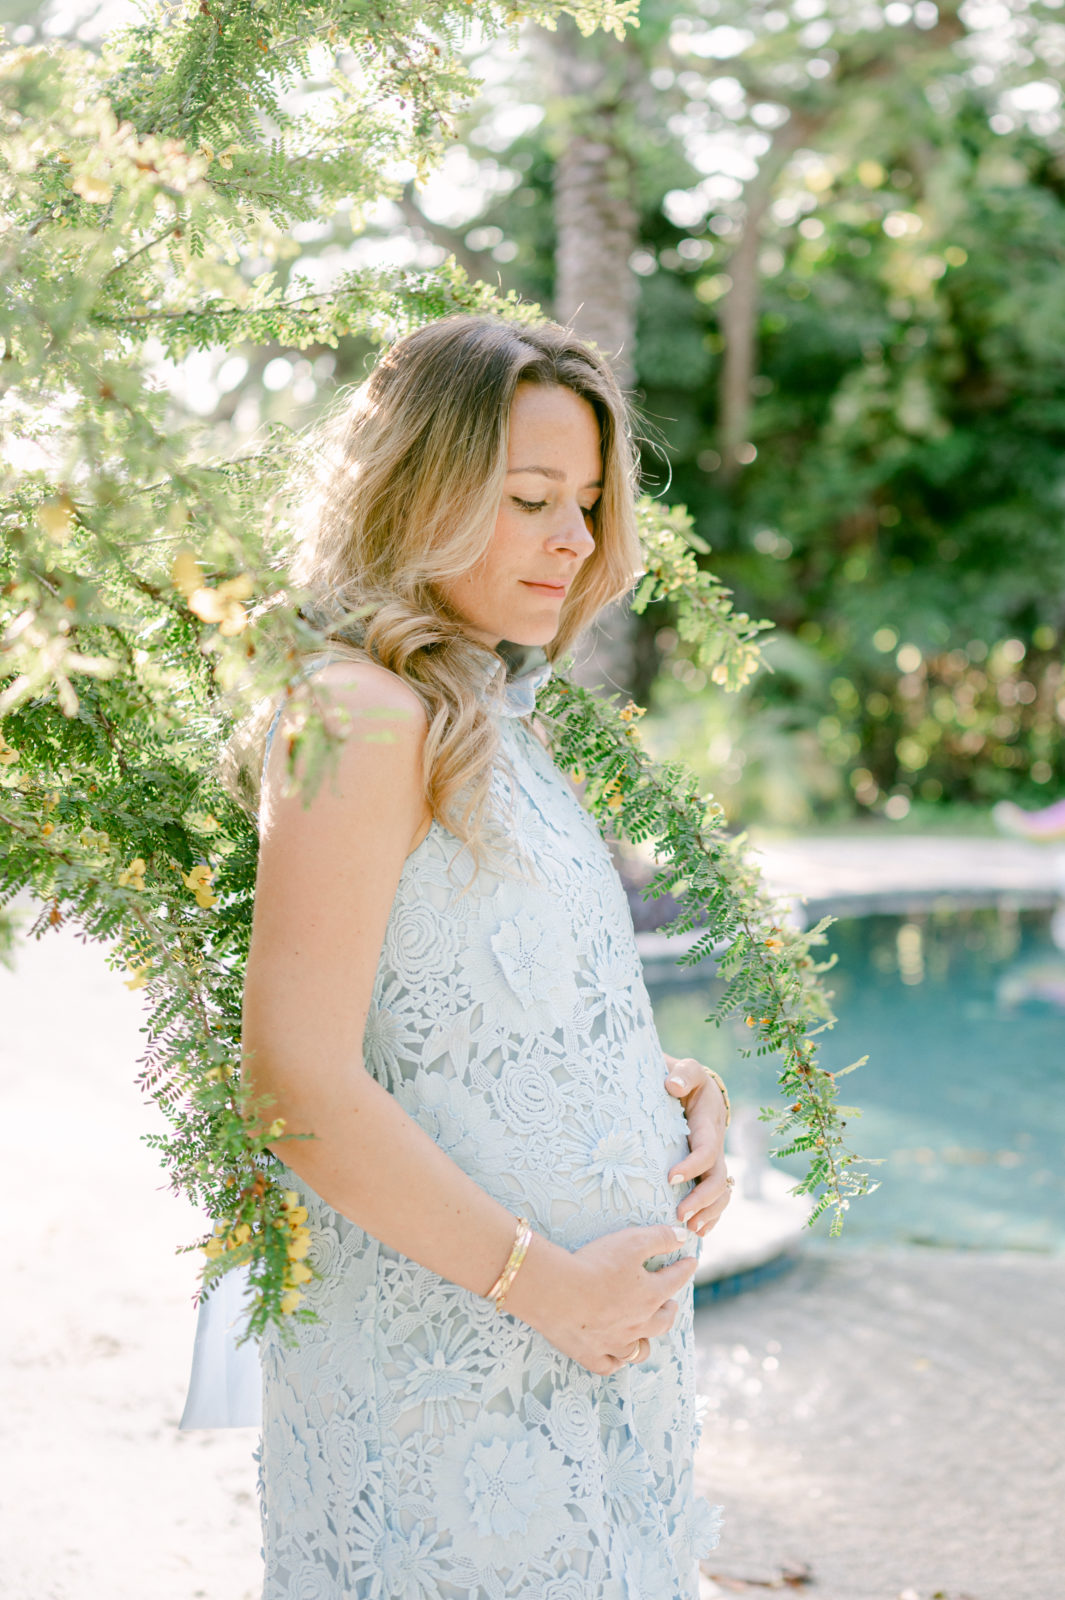 Mom to be looking down at her bump next to a swimming pool 